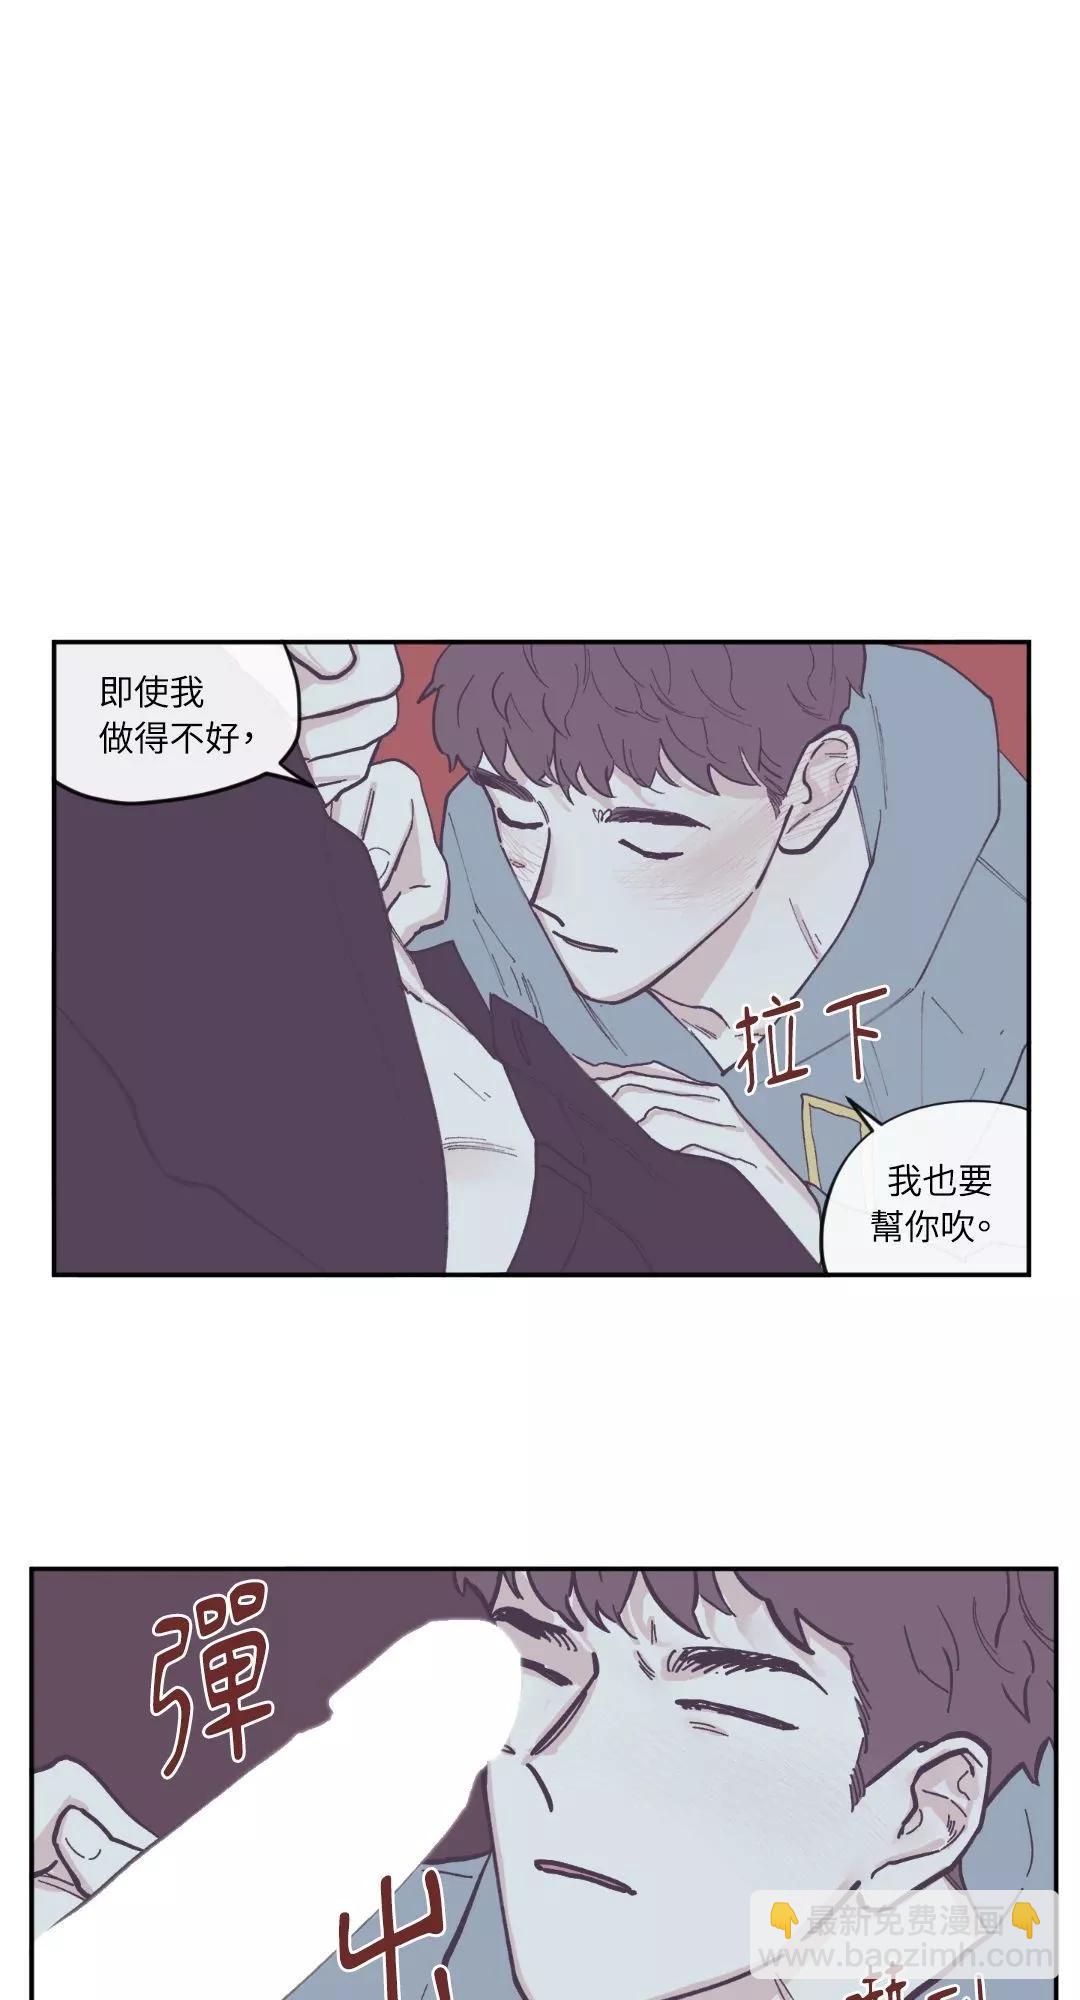 Clean Up百分百 - 第73话 - 4